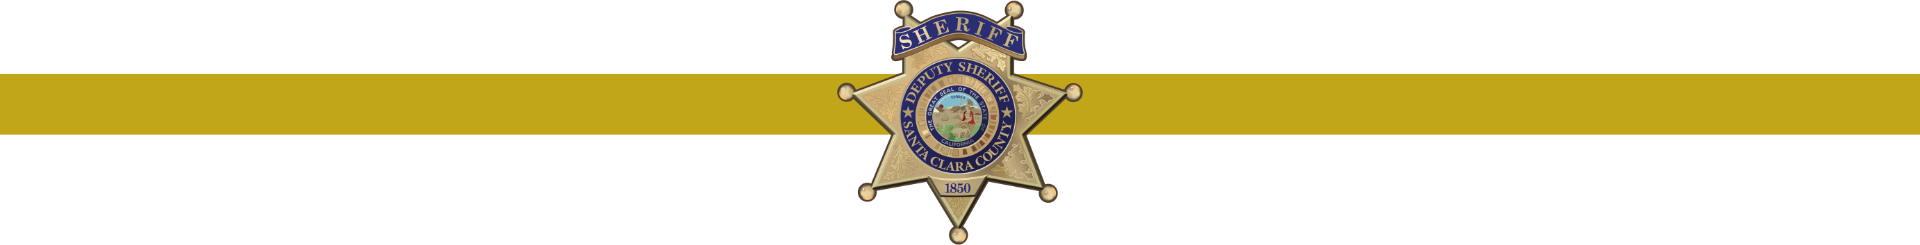 Sheriff Badge Footer